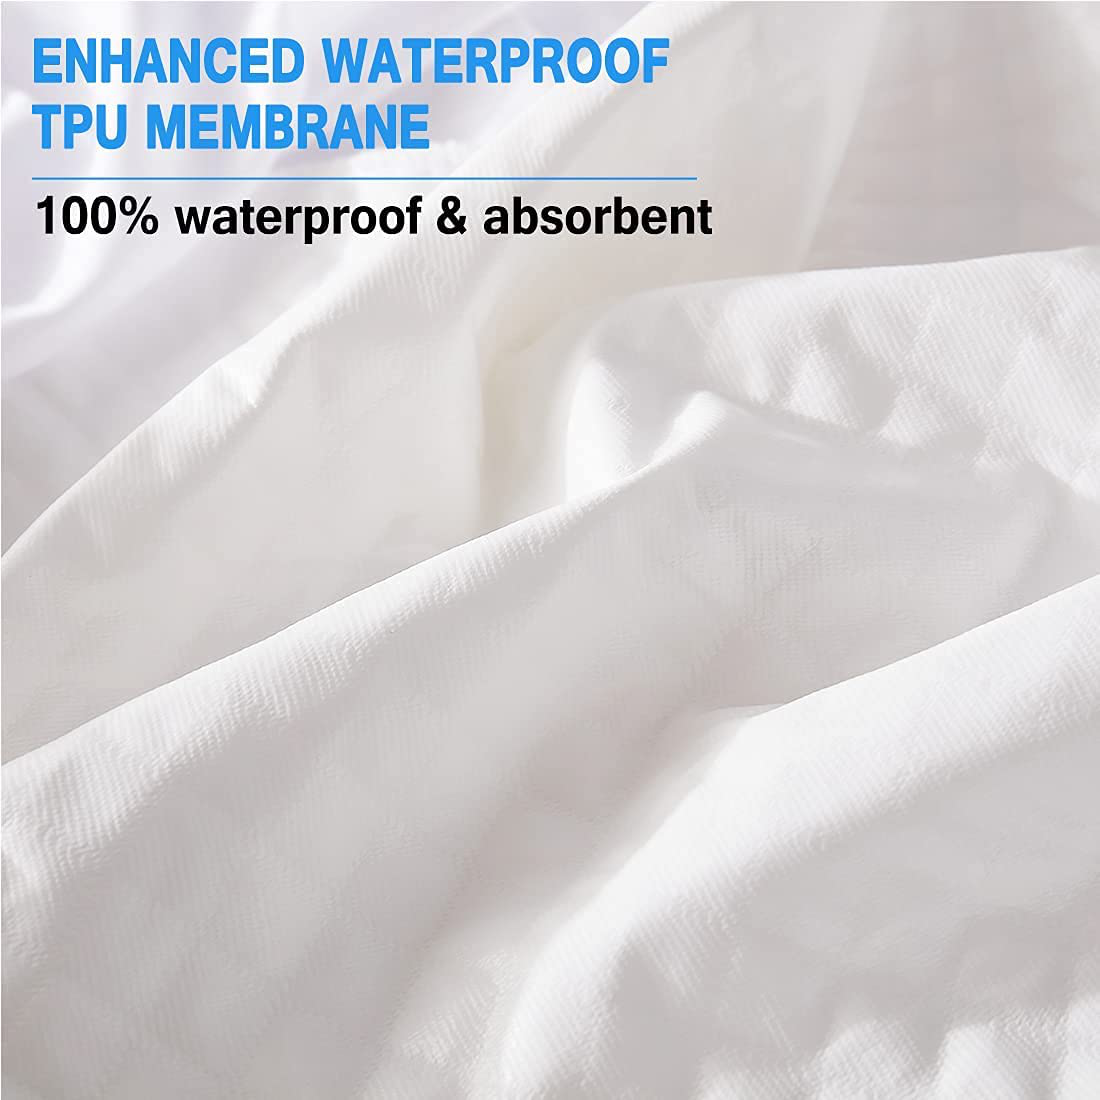 Friendriver Waterproof Mattress Protector, Quilted Fitted Mattress Topper, Ultra Soft Breathable Bed Mattress Pad for Maximum Protection, Mattress Cover Stretches up to 18'' Deep